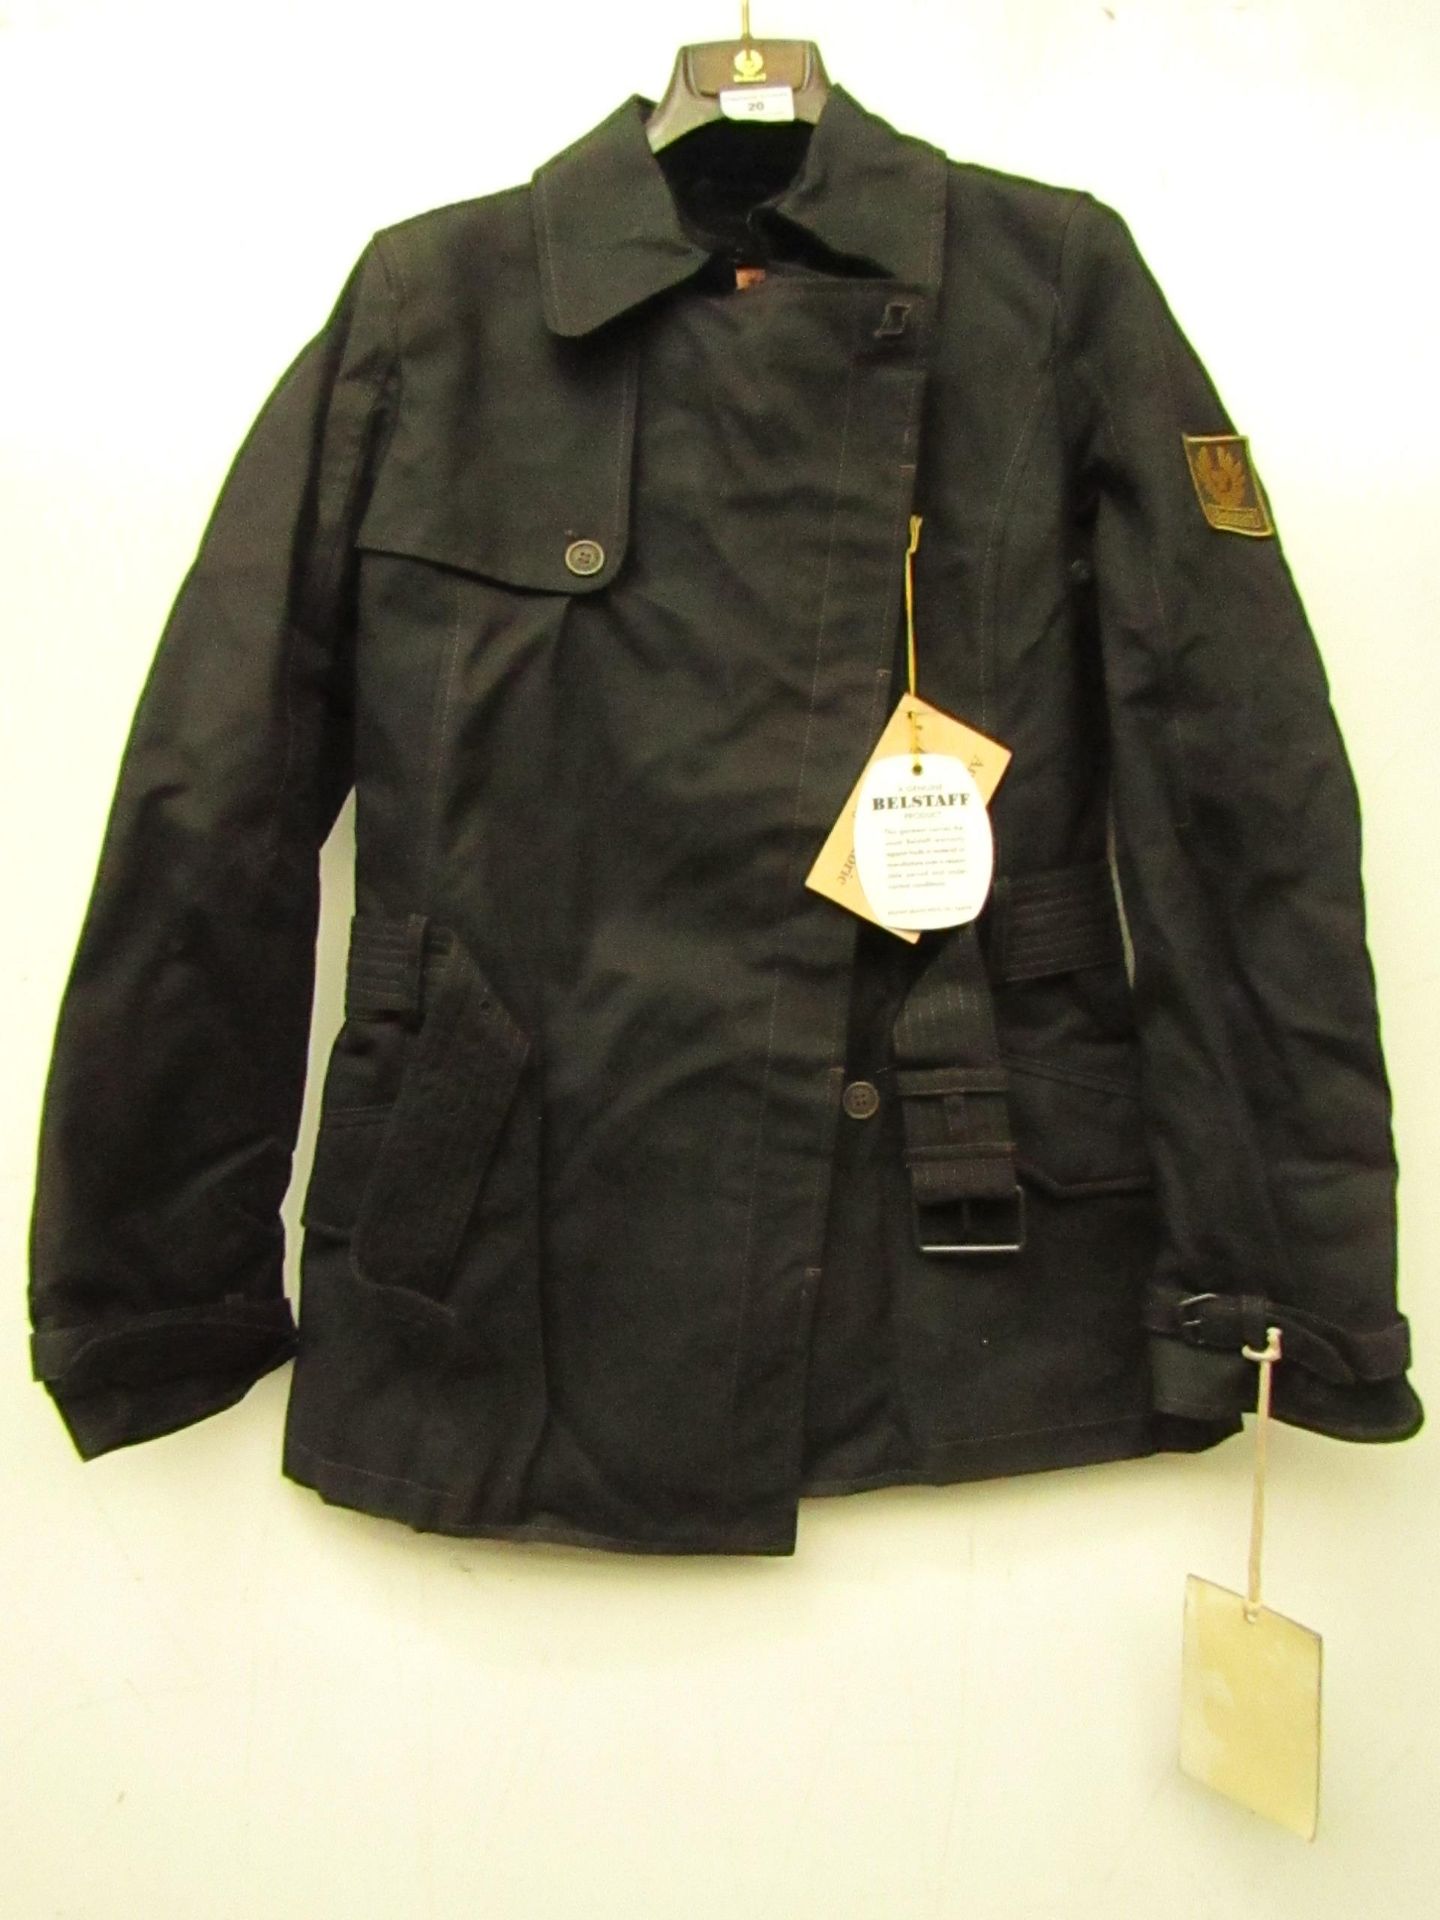 Ladies Belstaff Sheffield Jacket,new with tag, size 42